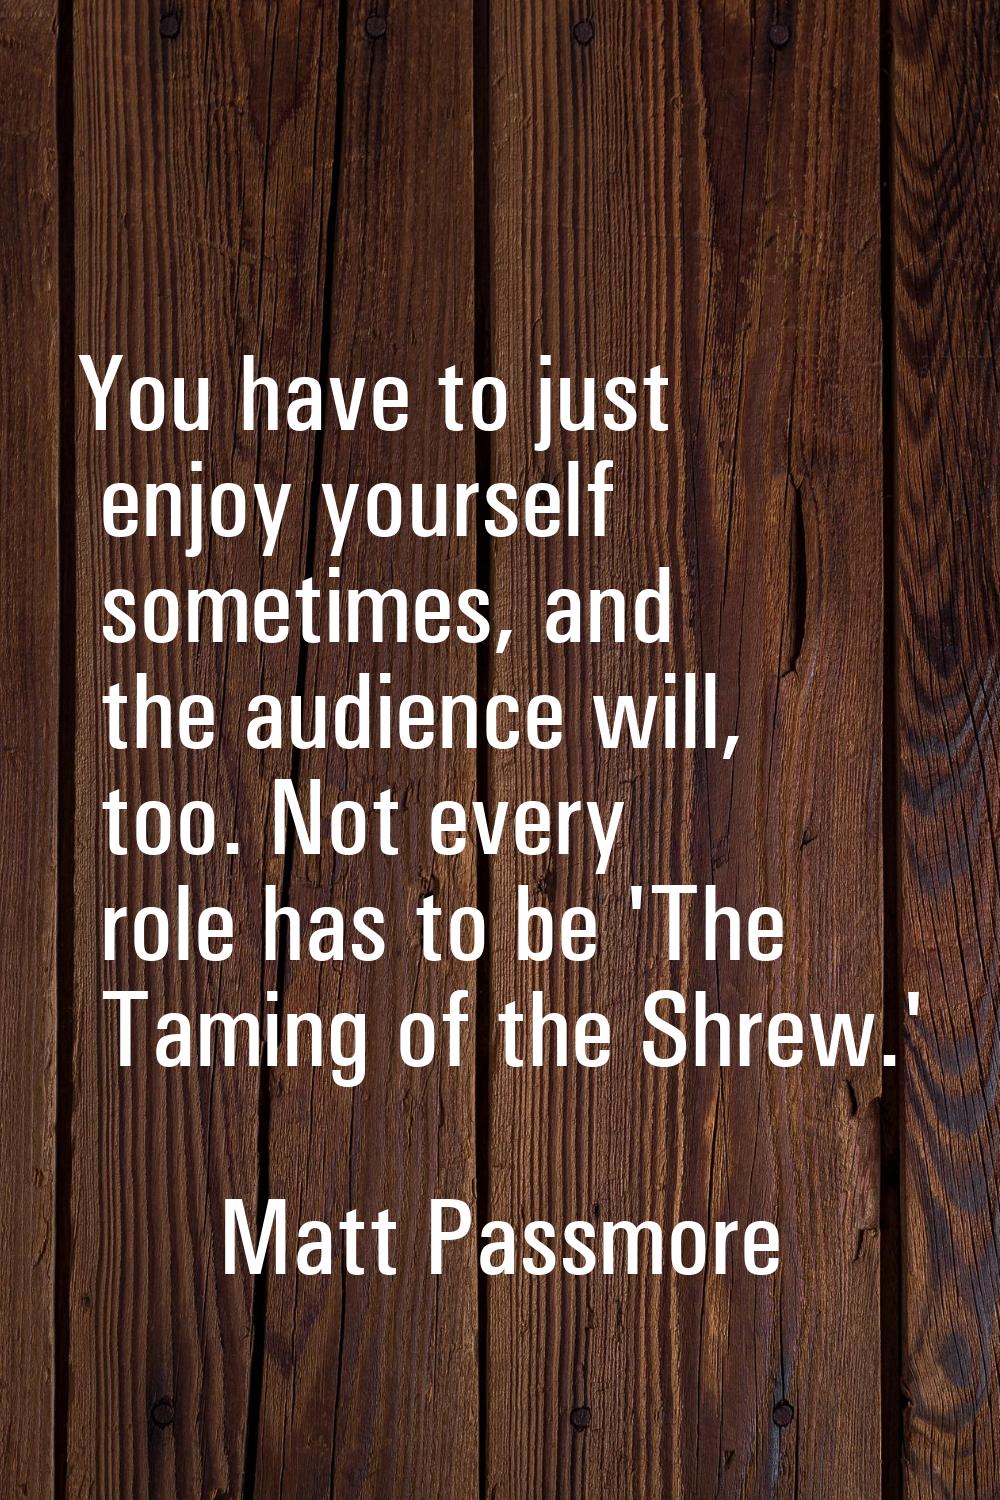 You have to just enjoy yourself sometimes, and the audience will, too. Not every role has to be 'Th